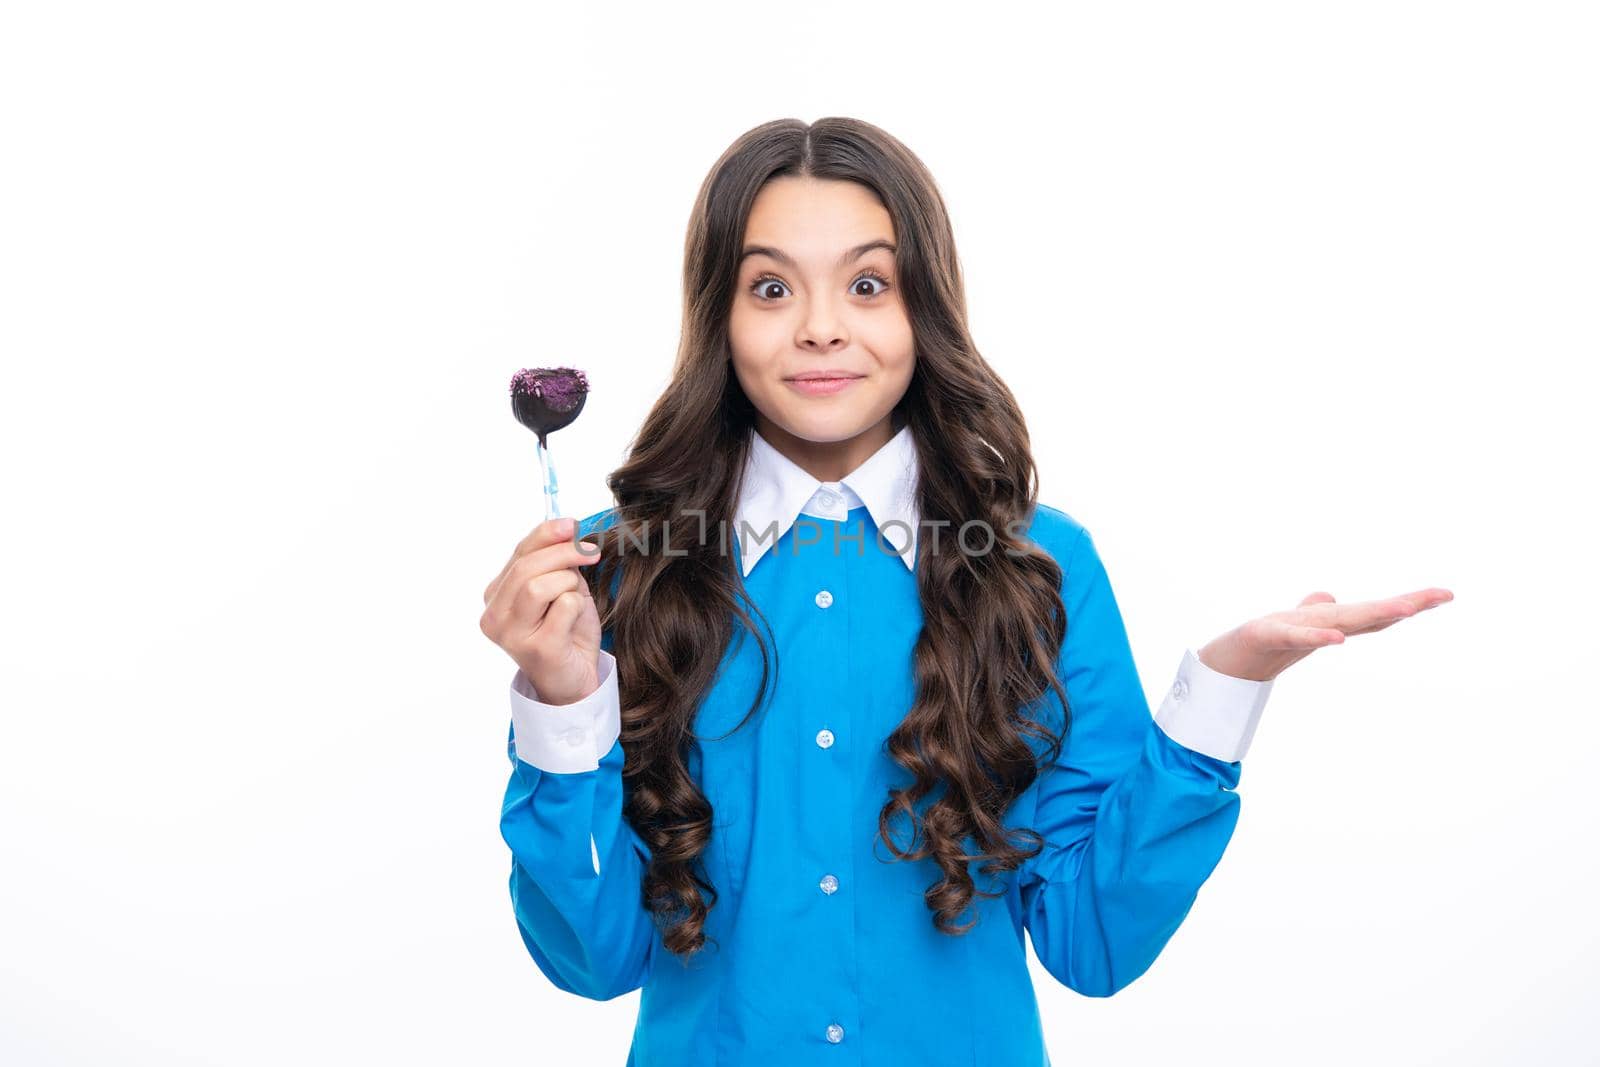 Teenage girl with lollipop, child eating sugar lollipops, kids sweets candy shop